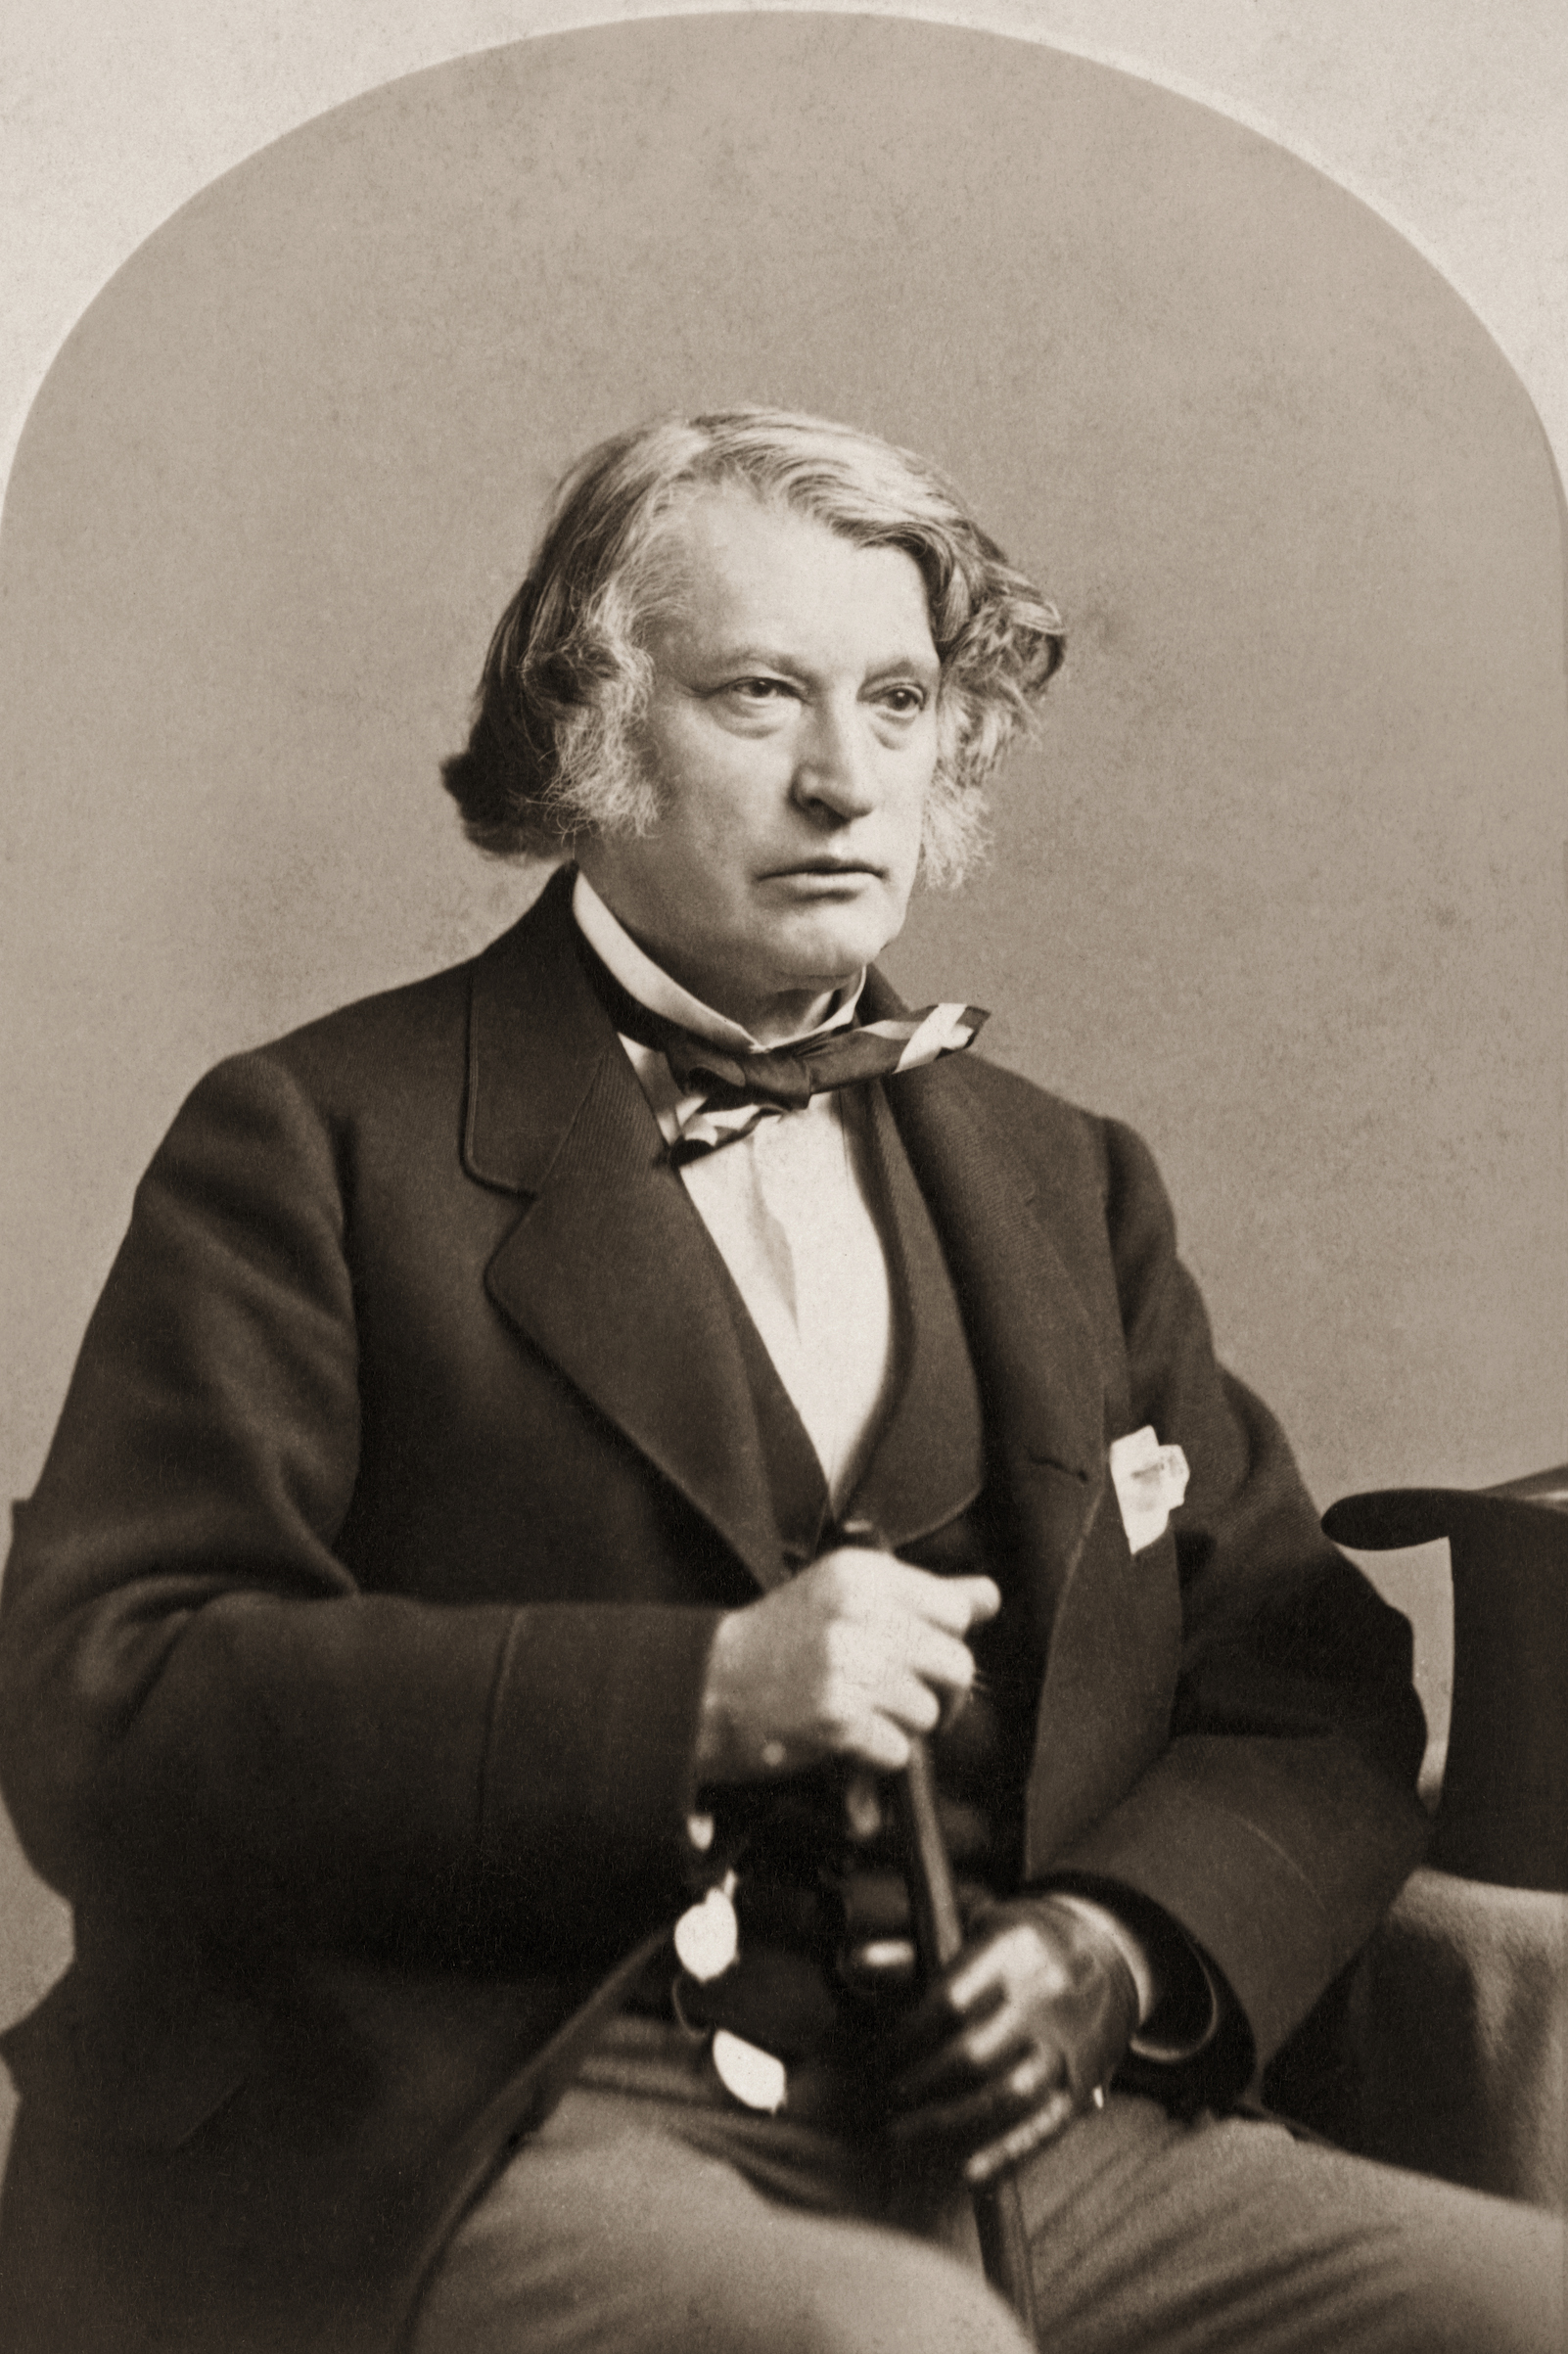 Charles Sumner seated with cane, circa early 1870's. (Bettmann Archive/Getty Images)